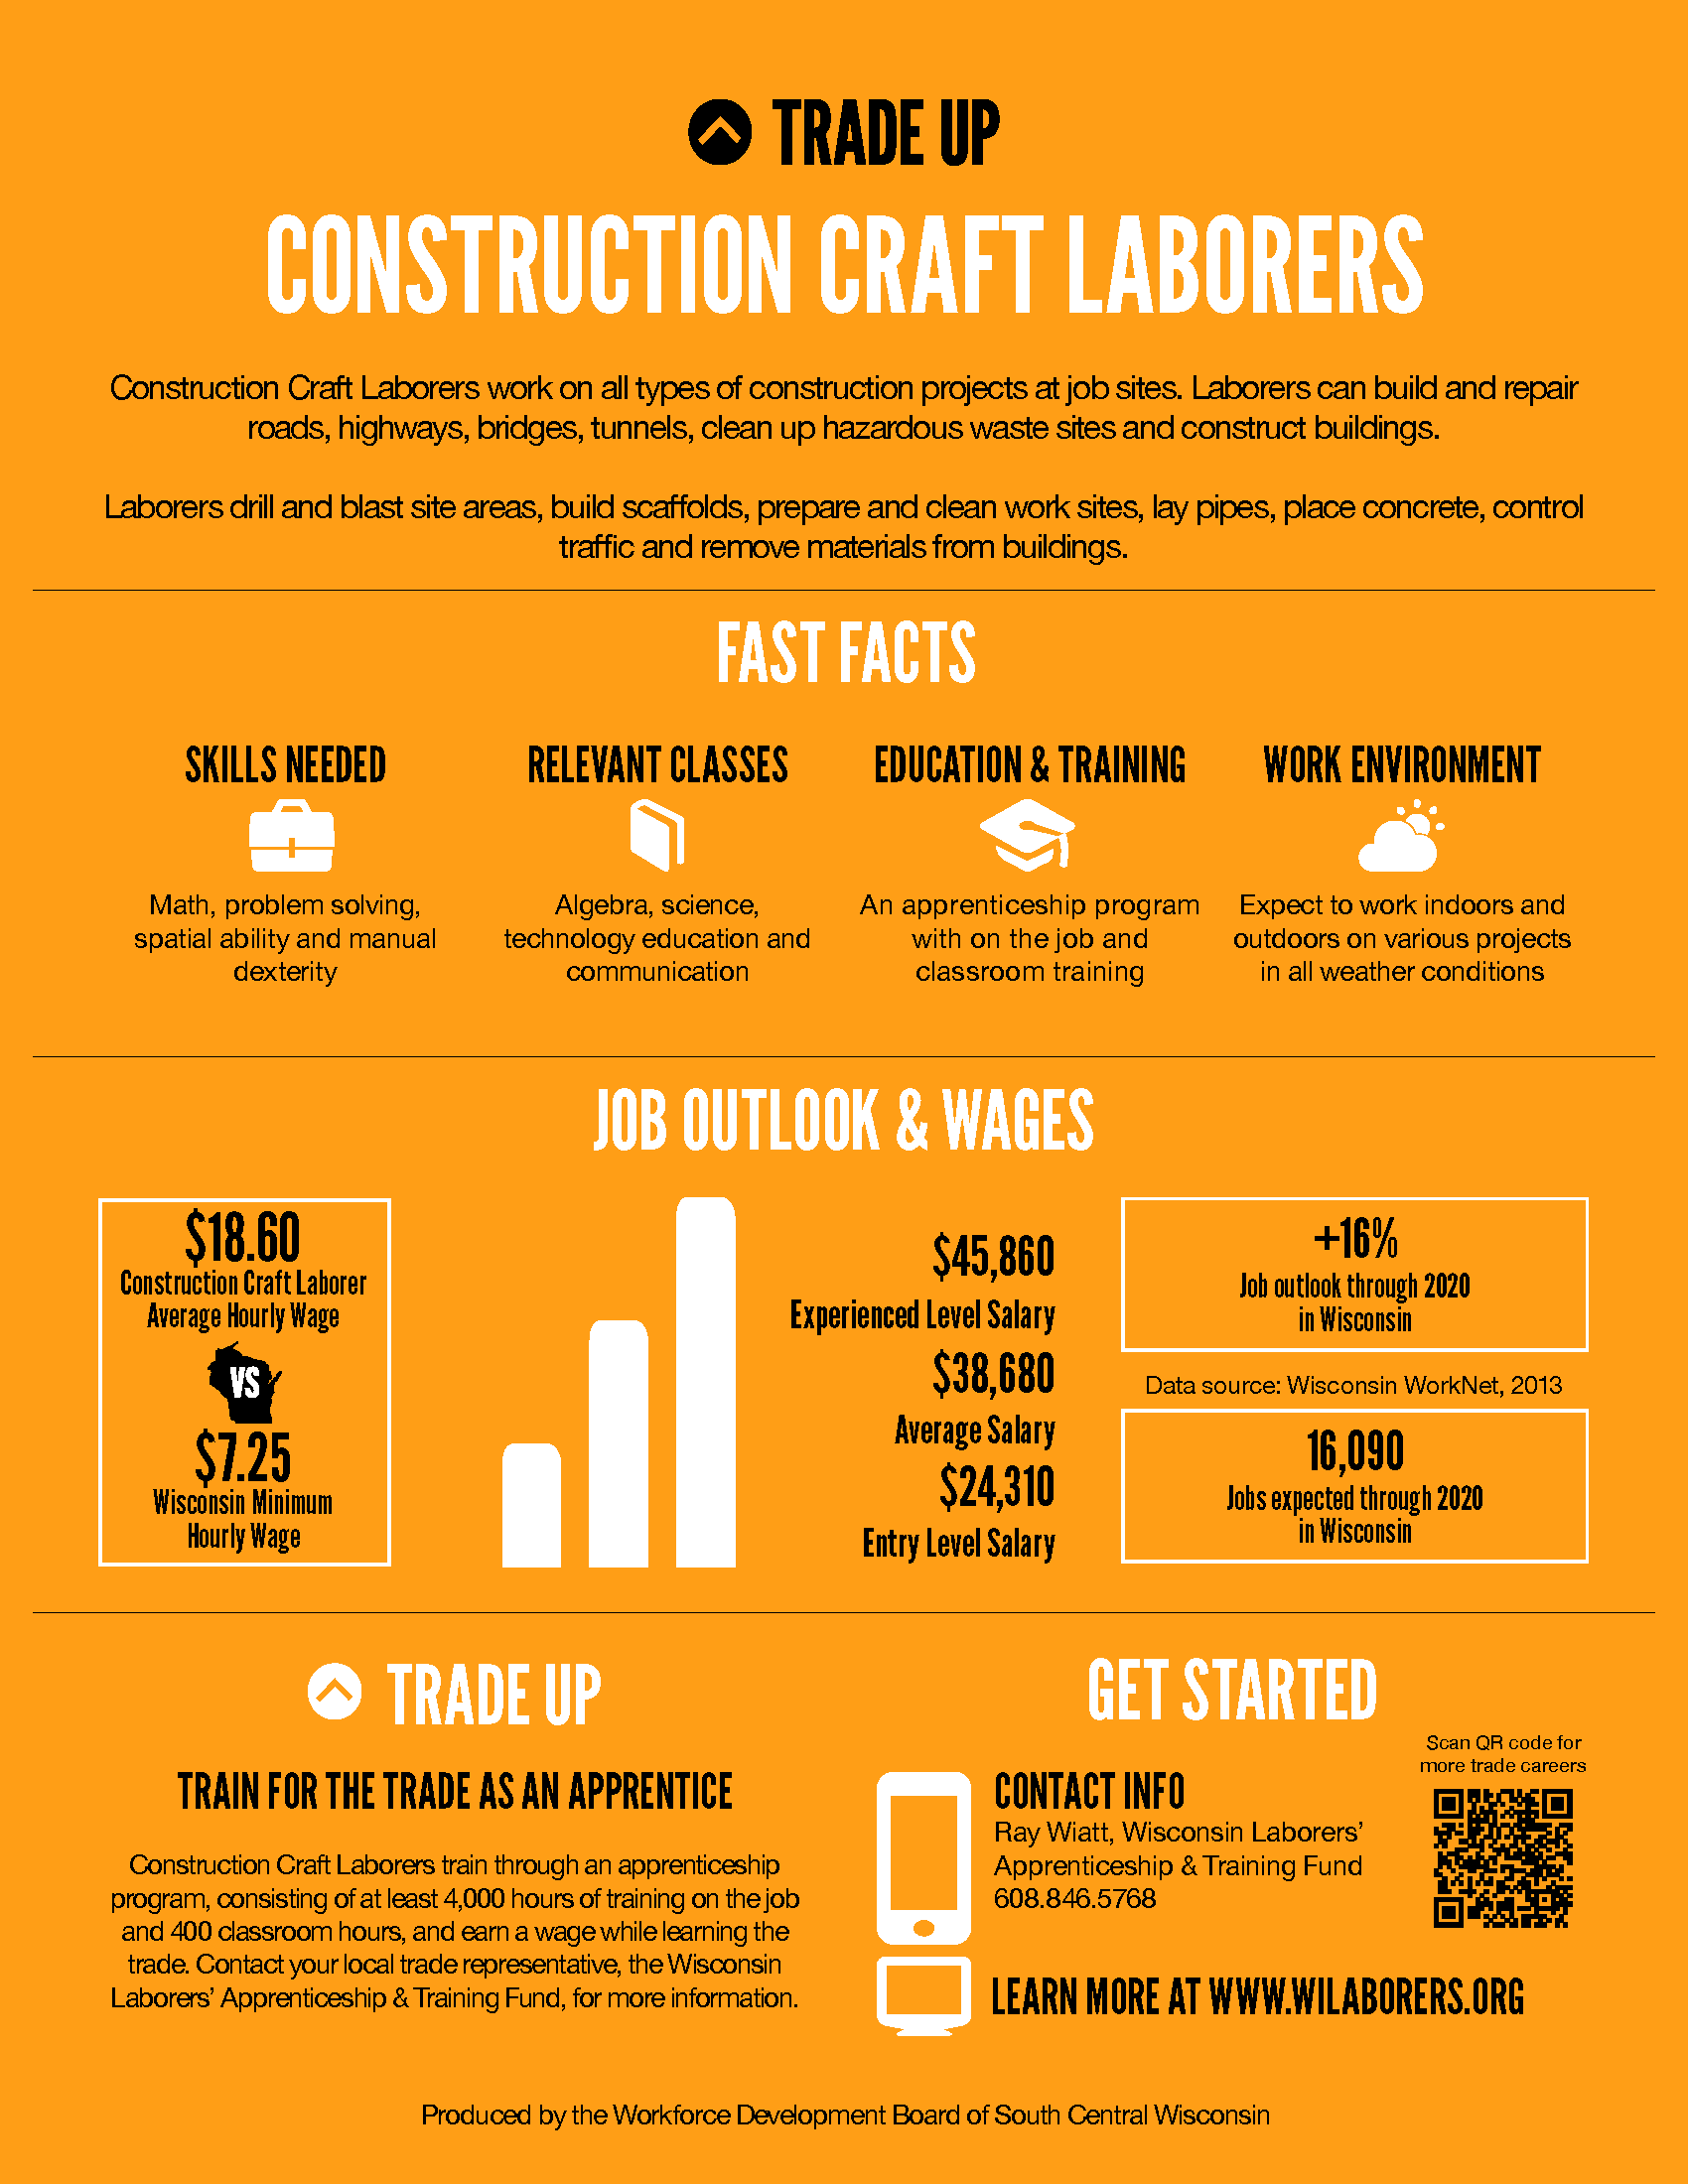 Construction Craft Laborers latest feature in Trade Up Campaign